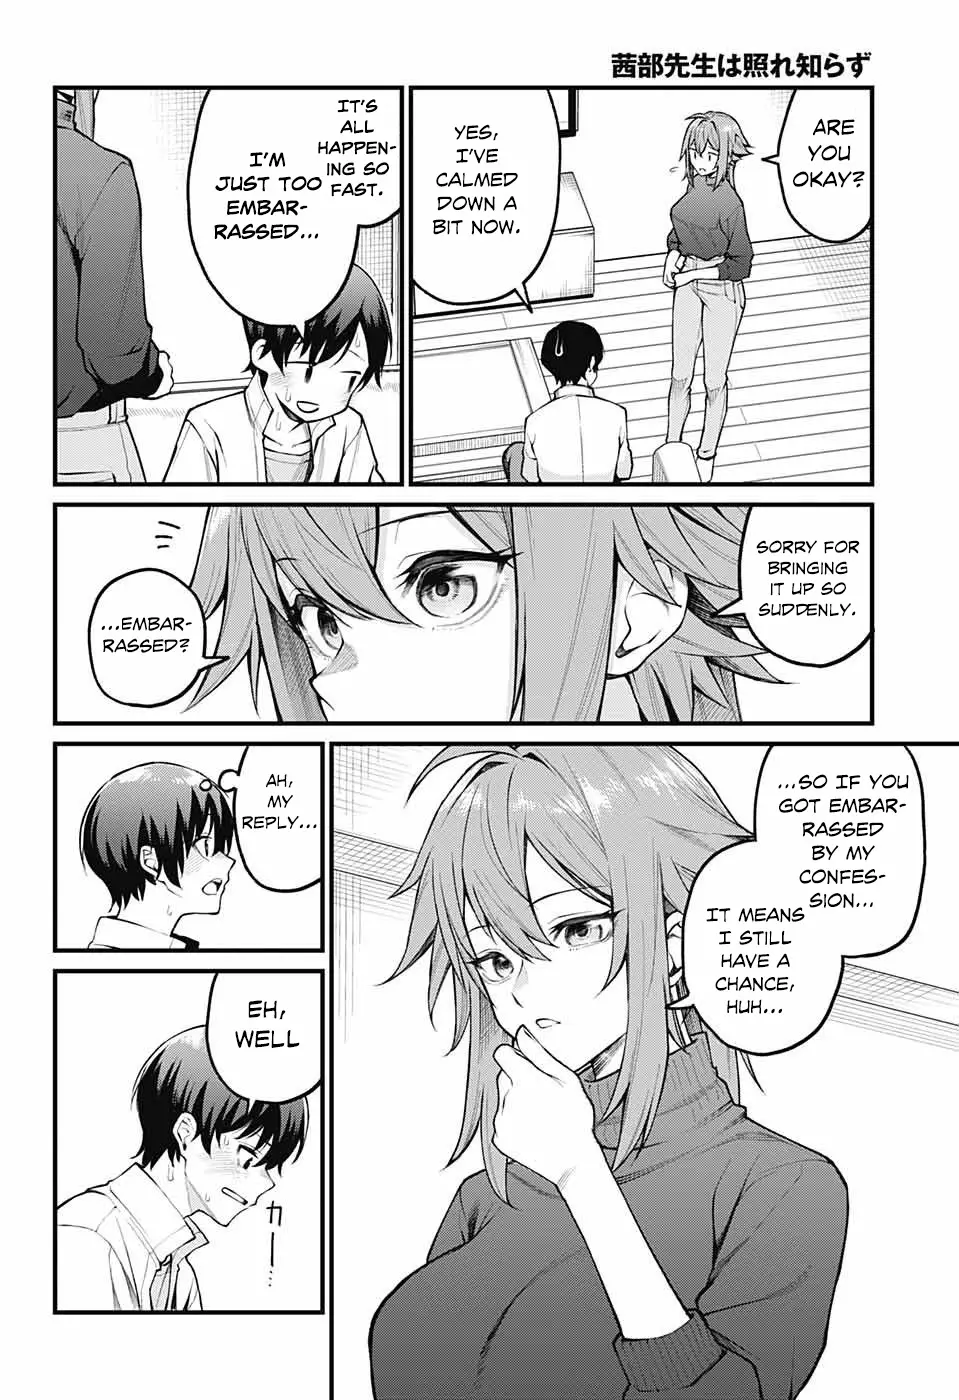 Akanabe-Sensei Doesn't Know About Embarrassment - 1 page 16-6f134a3f